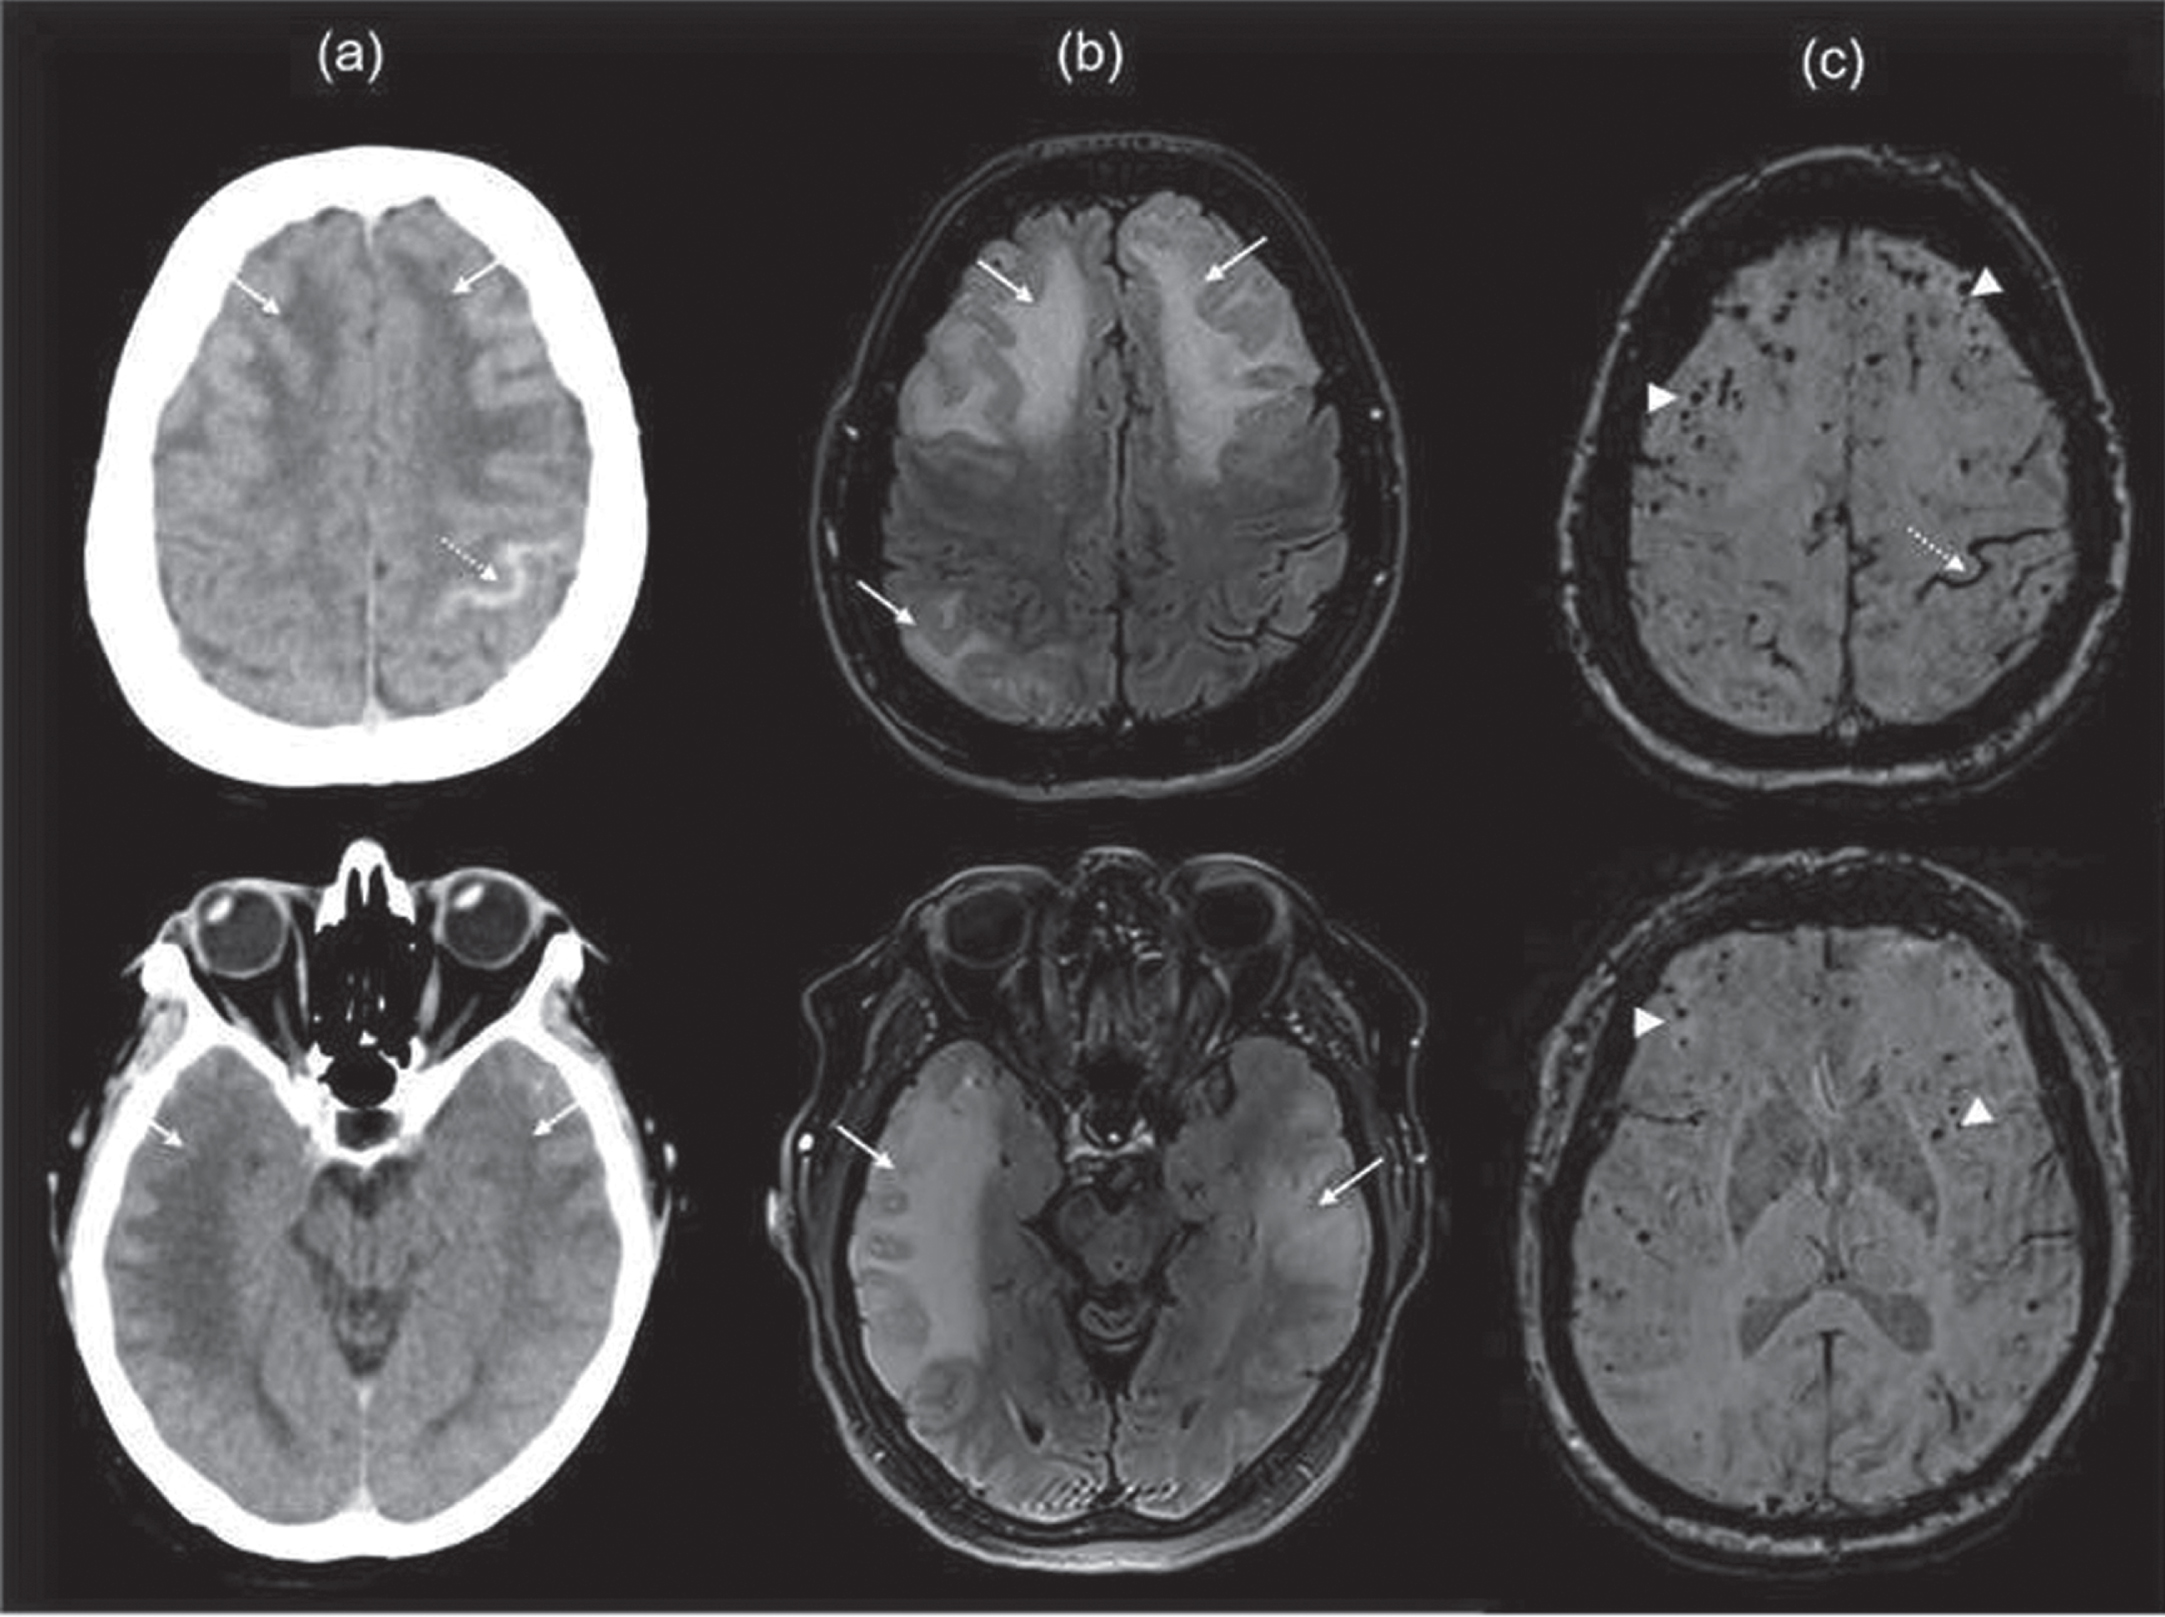 Radiographic findings in 65-year-old-woman presented with TFNE secondary to CAARI with microhemorrhages. Notes: Axial non-contrast CT scan of the head (a), axial MRI T2-FLAIR (b), and SWI sequence (c) show a pattern of inflammatory CAA with diffuse vasogenic edema involving predominantly the frontal, parietal, and temporal lobes (white arrows) resulting in effacement of adjacent sulci; there are associated multiple foci of petechial microhemorrhages (double arrows) and acute subarachnoid hemorrhage in the left central sulcus (dotted arrow).